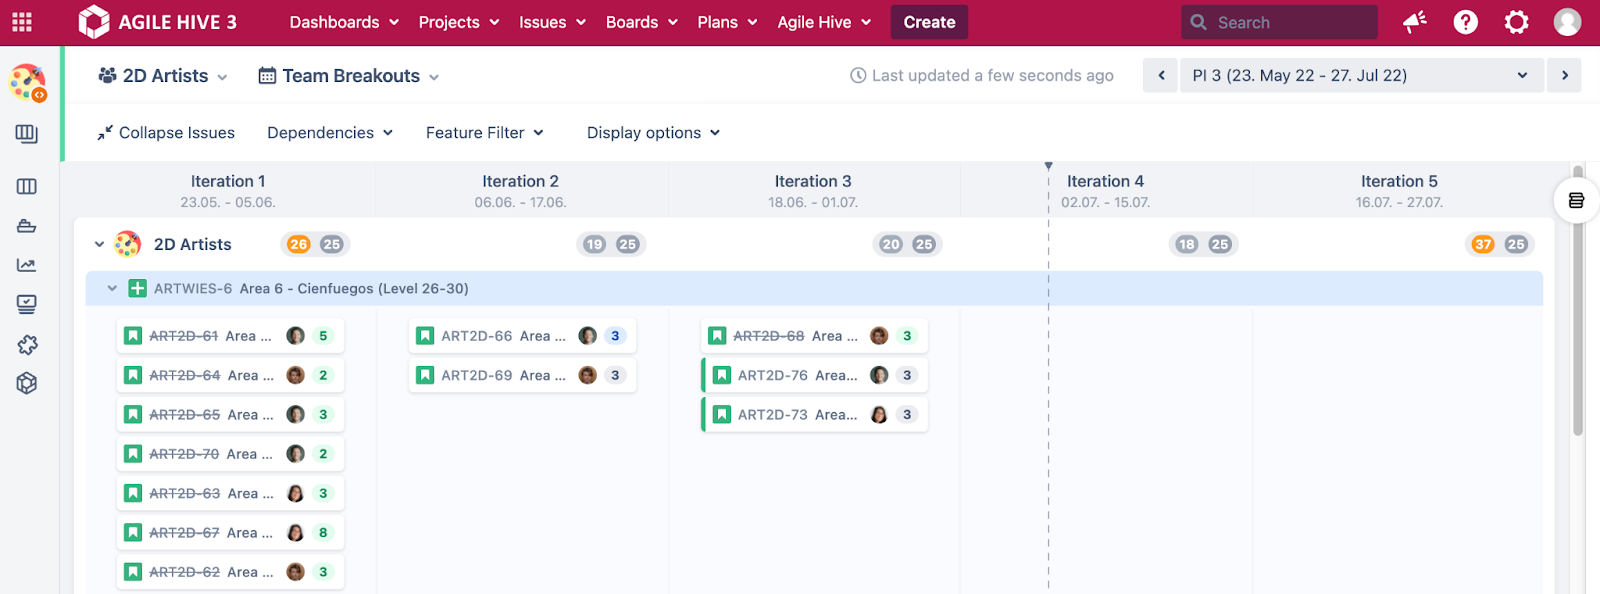 How to always be one step ahead with SAFe and Agile Hive - team breakouts board